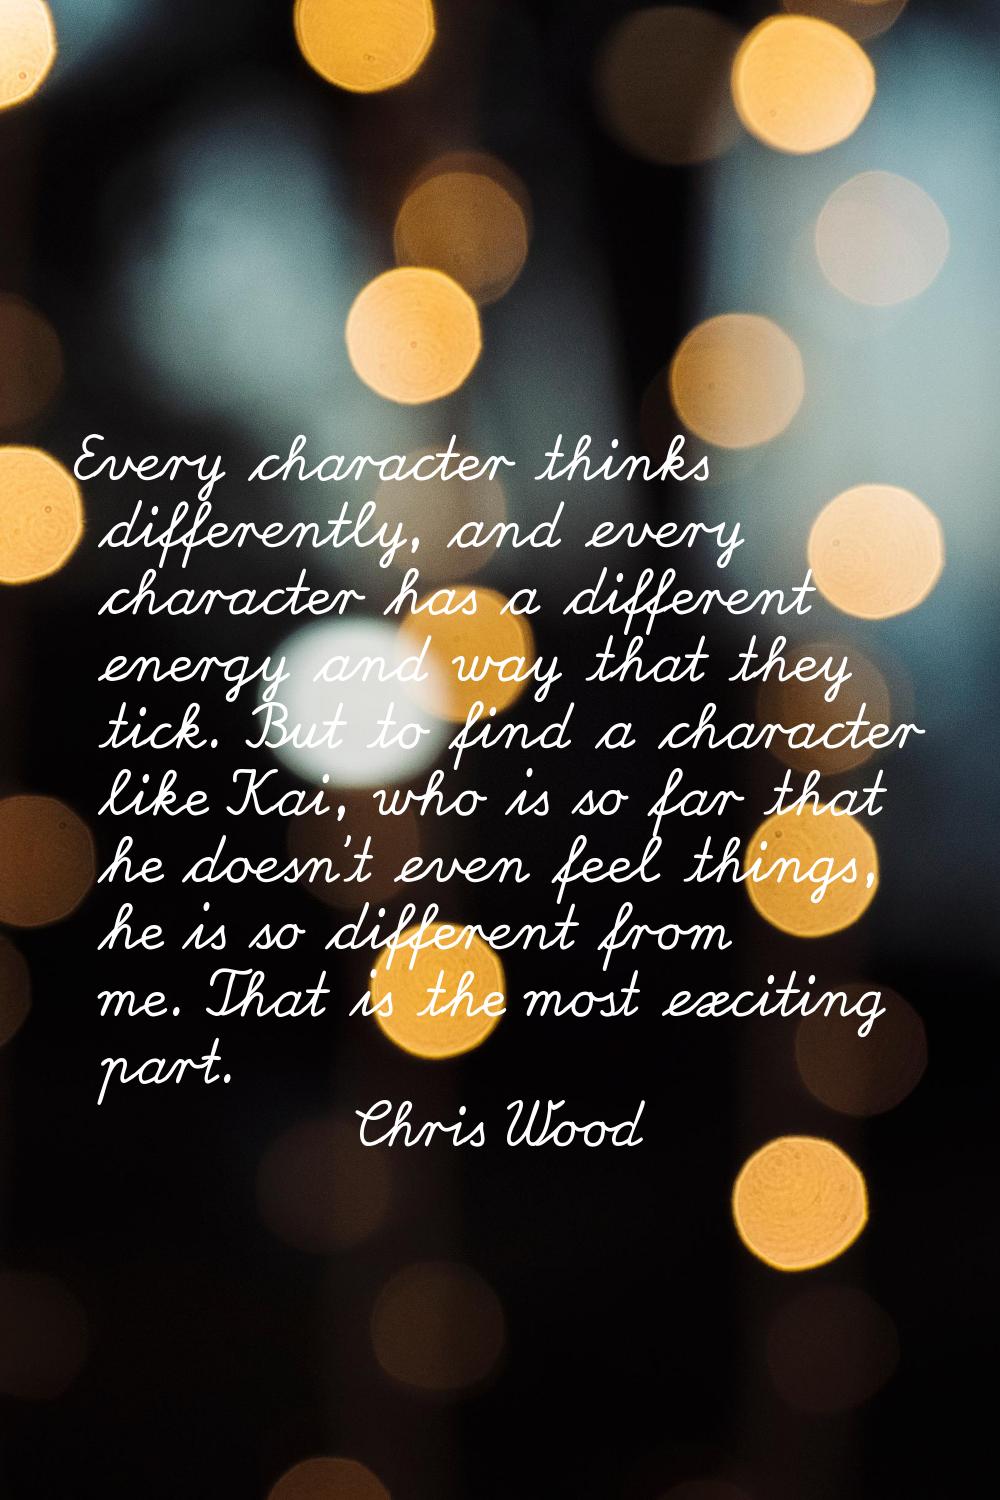 Every character thinks differently, and every character has a different energy and way that they ti